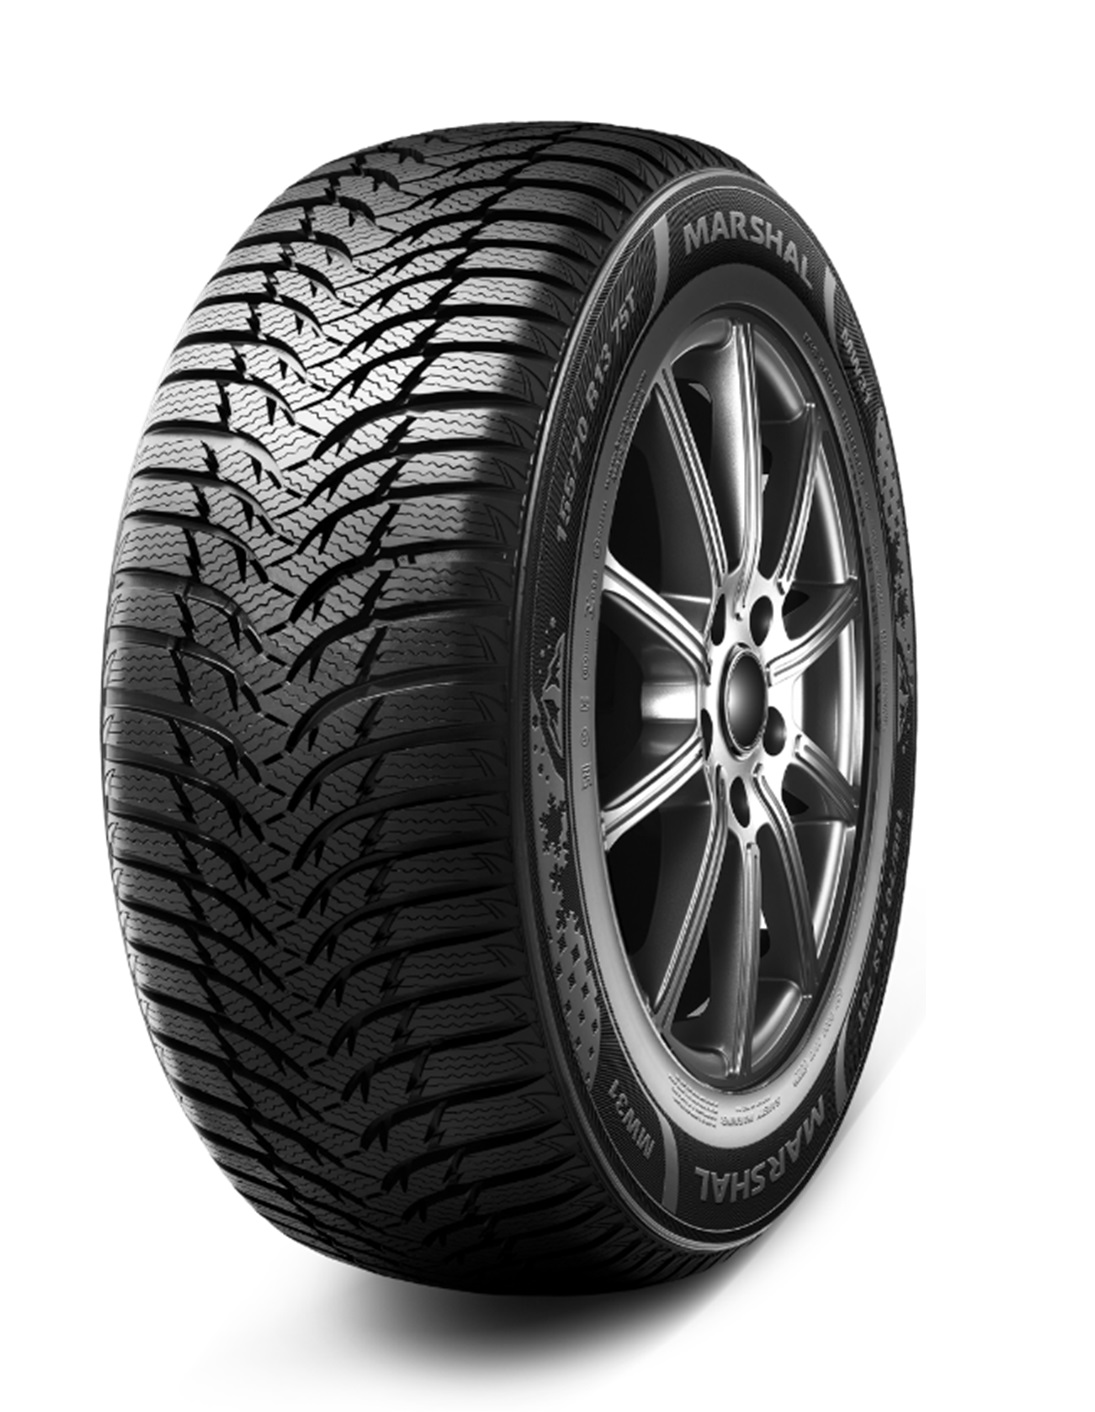 Gomme Nuove Marshal 175/70 R14 84T MW31 M+S pneumatici nuovi Invernale